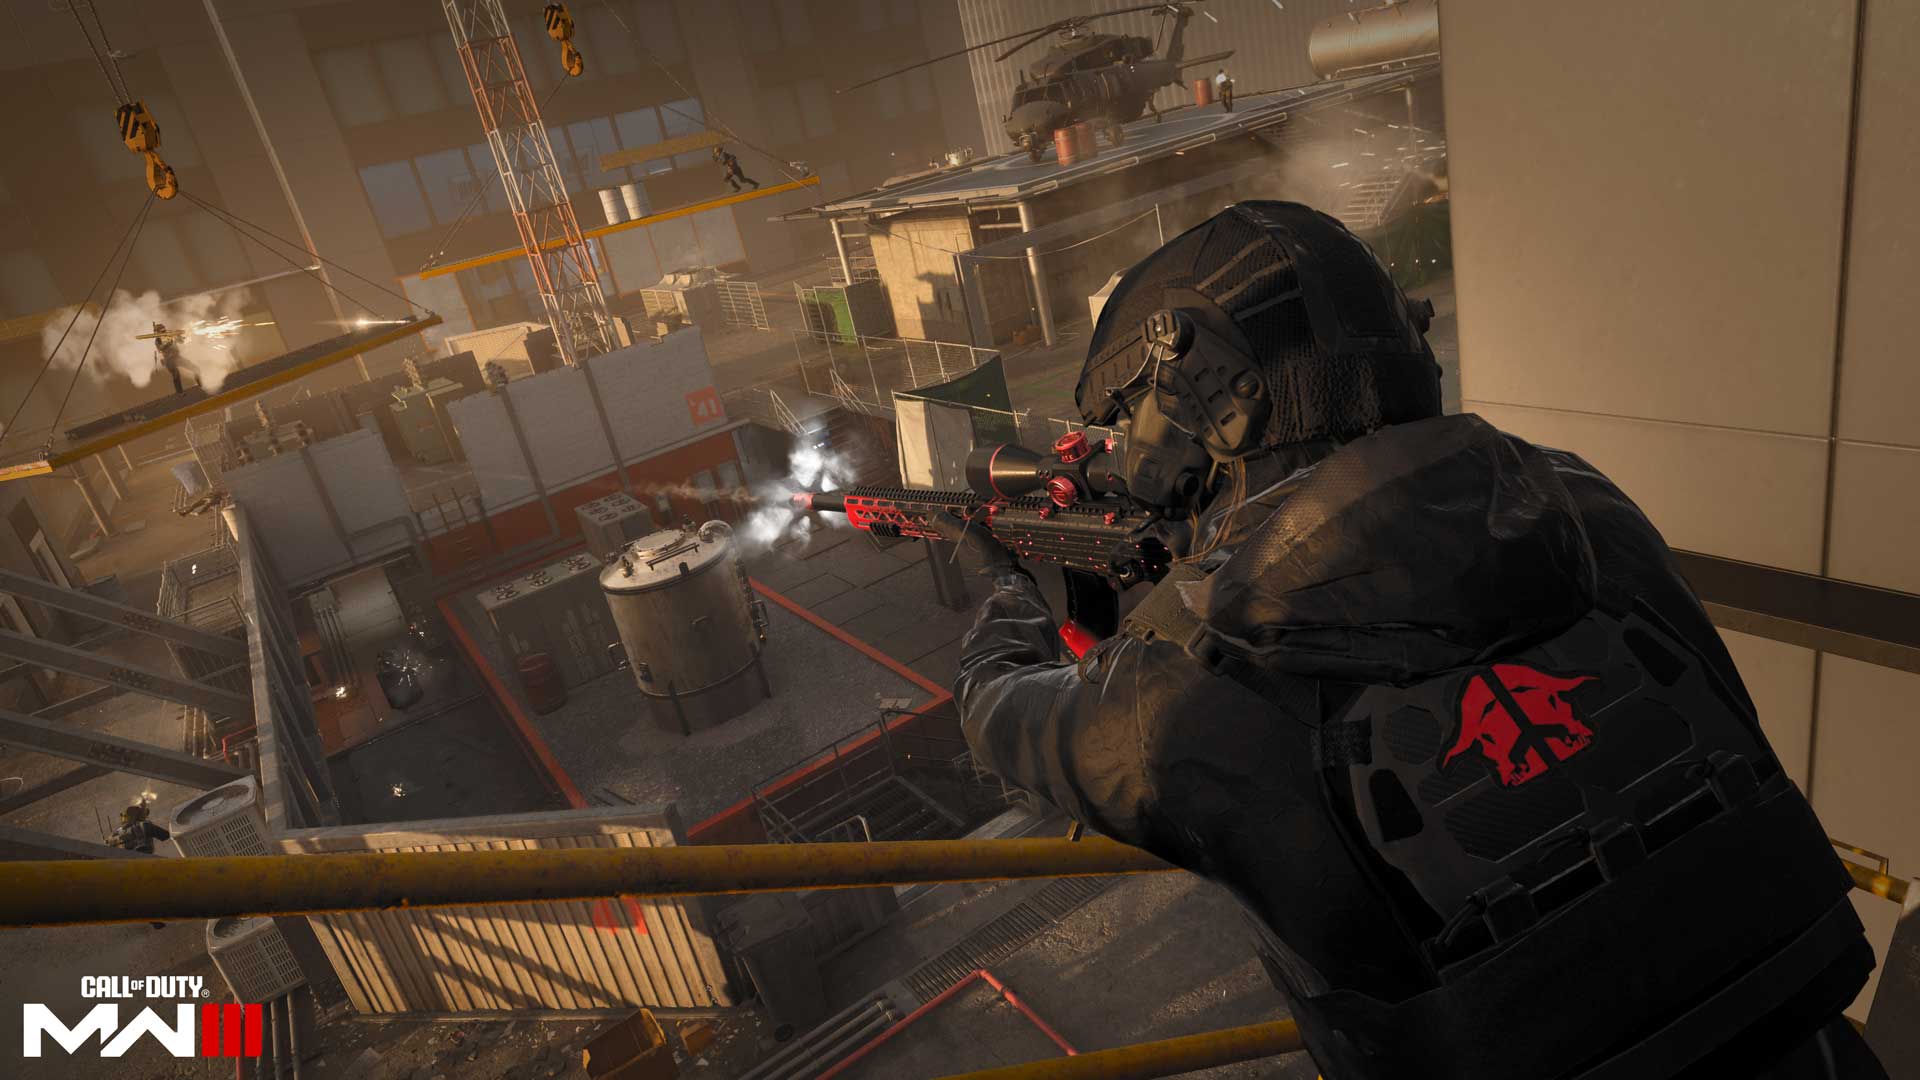 Download Now Call of Duty: Advanced Warfare Supremacy DLC on PC